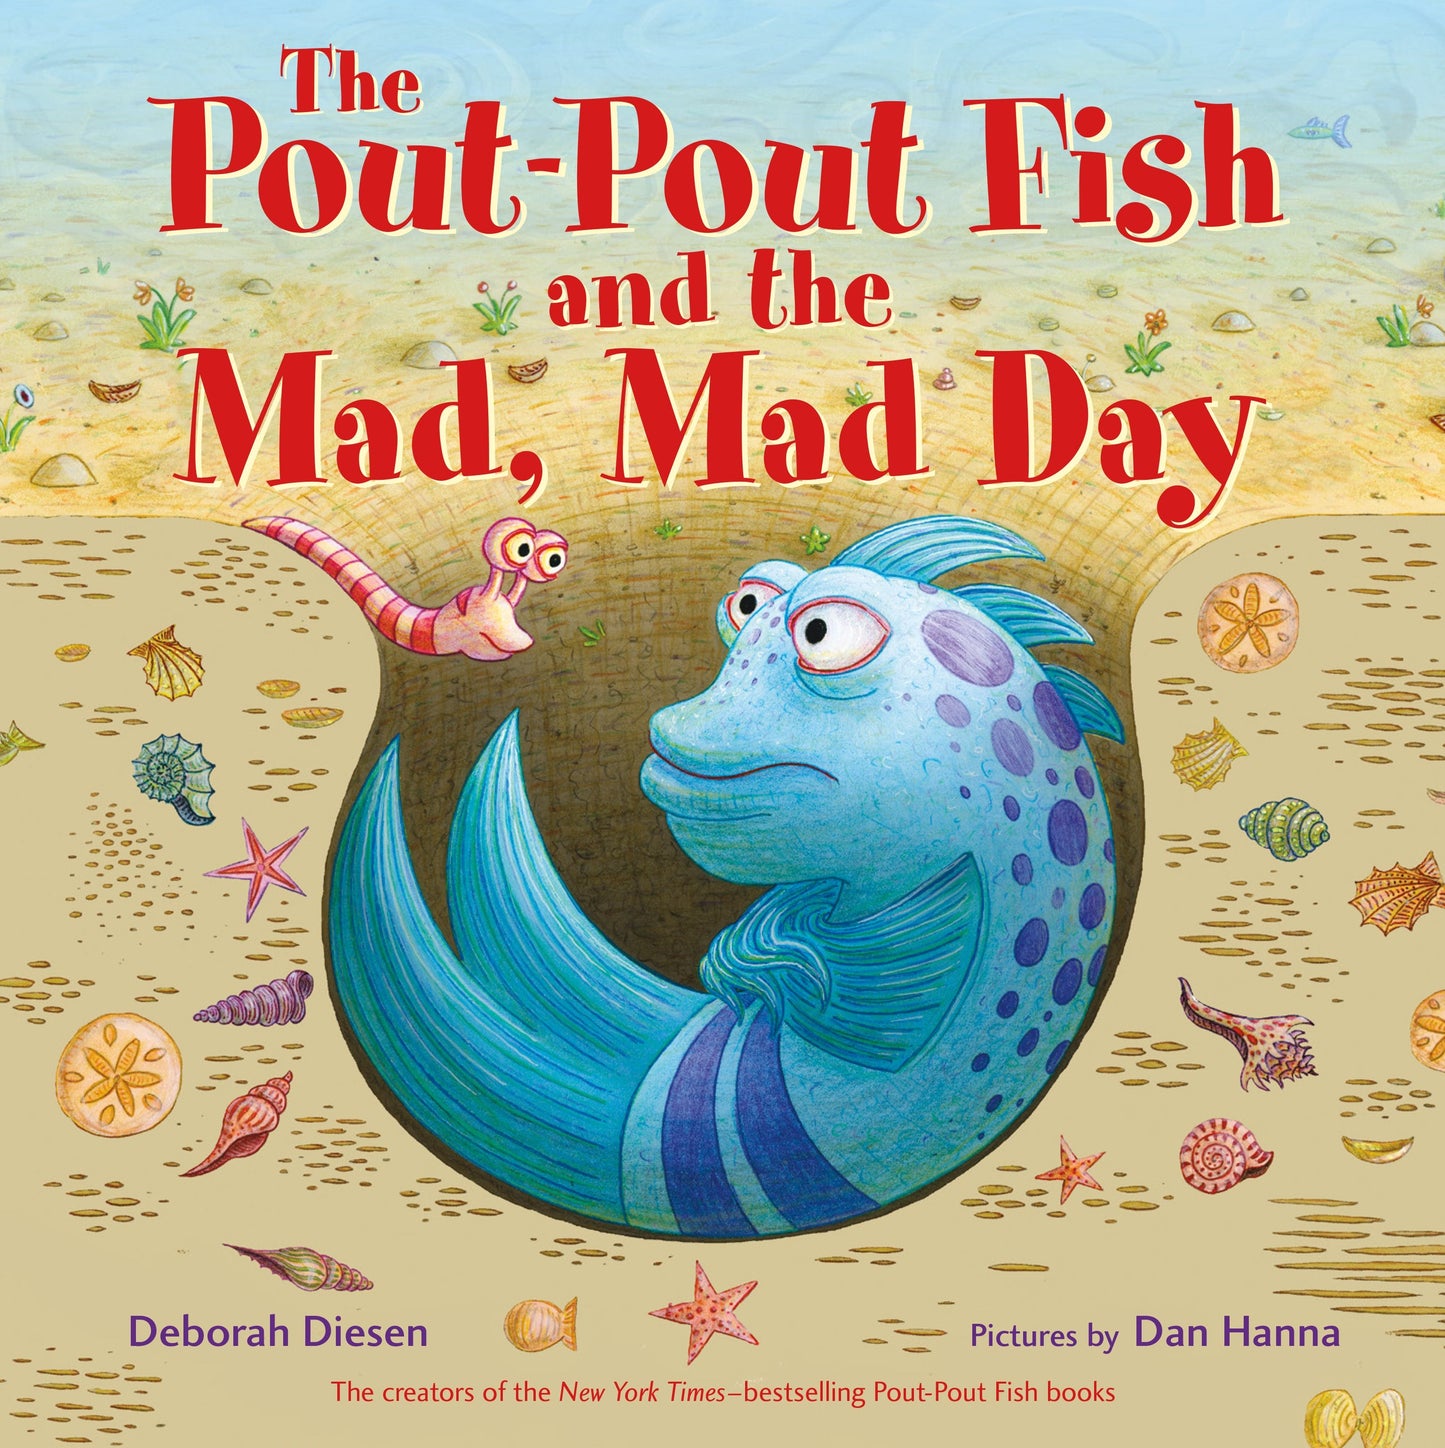 THE POUT-POUT FISH AND THE MAD MAD DAY